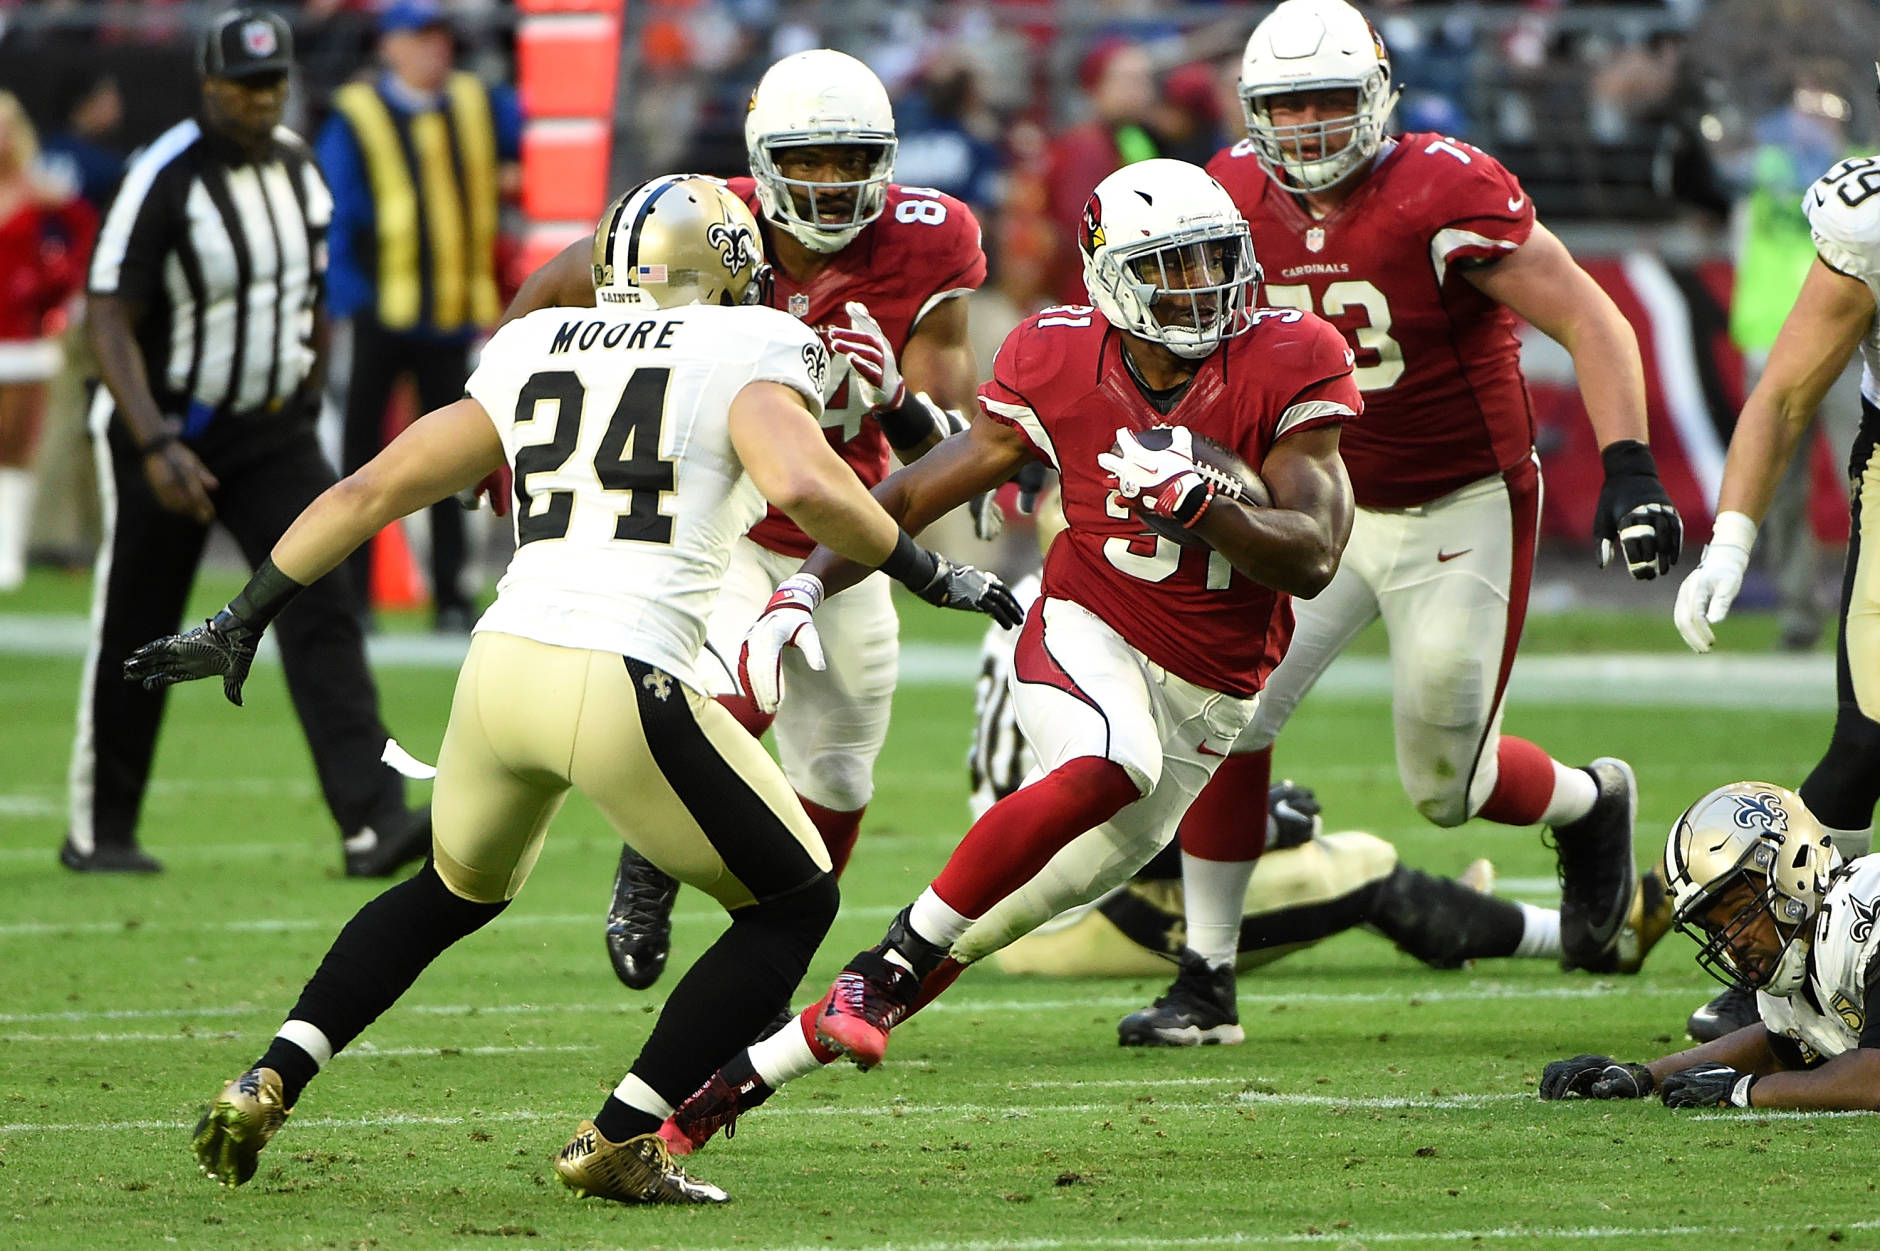 GLENDALE, AZ - DECEMBER 18:  David Johnson #31 of the Arizona Cardinals runs with the ball during the second half against the New Orleans Saints at University of Phoenix Stadium on December 18, 2016 in Glendale, Arizona. Saints won 48-41. (Photo by Norm Hall/Getty Images)